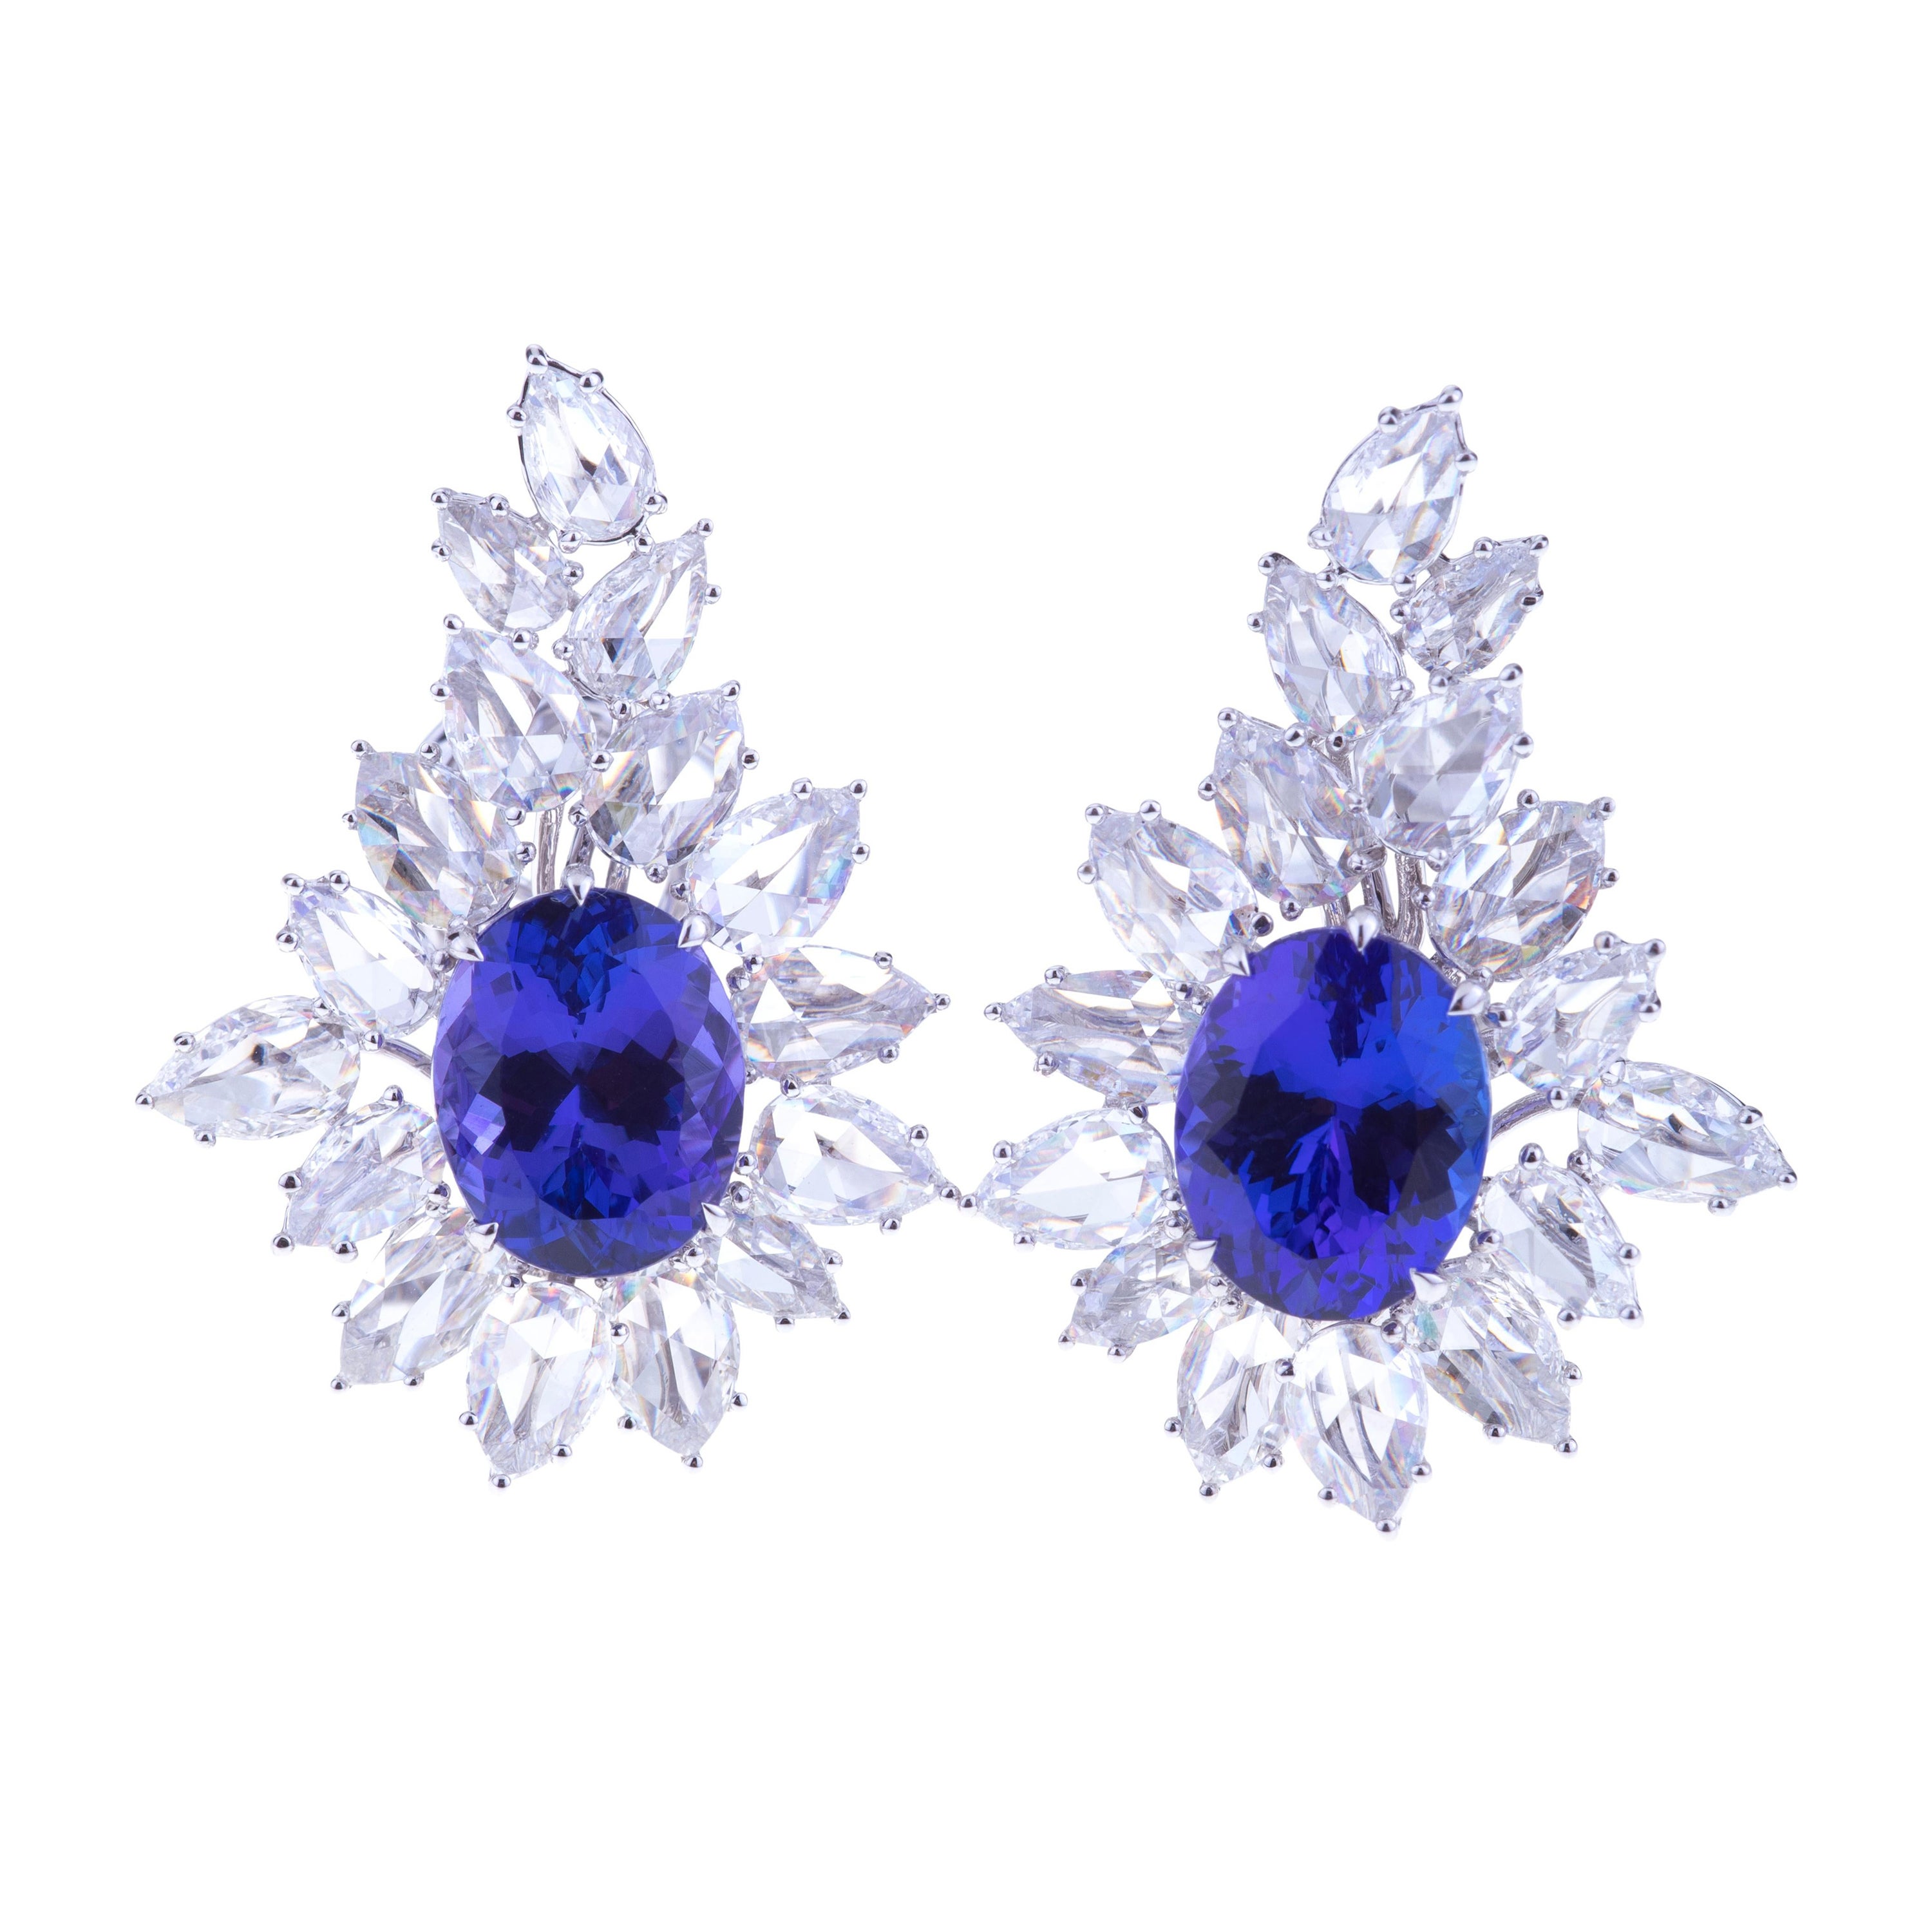 Selected Intense Blue Tanzanite Earrings White Gold with Diamonds, Matching Ring